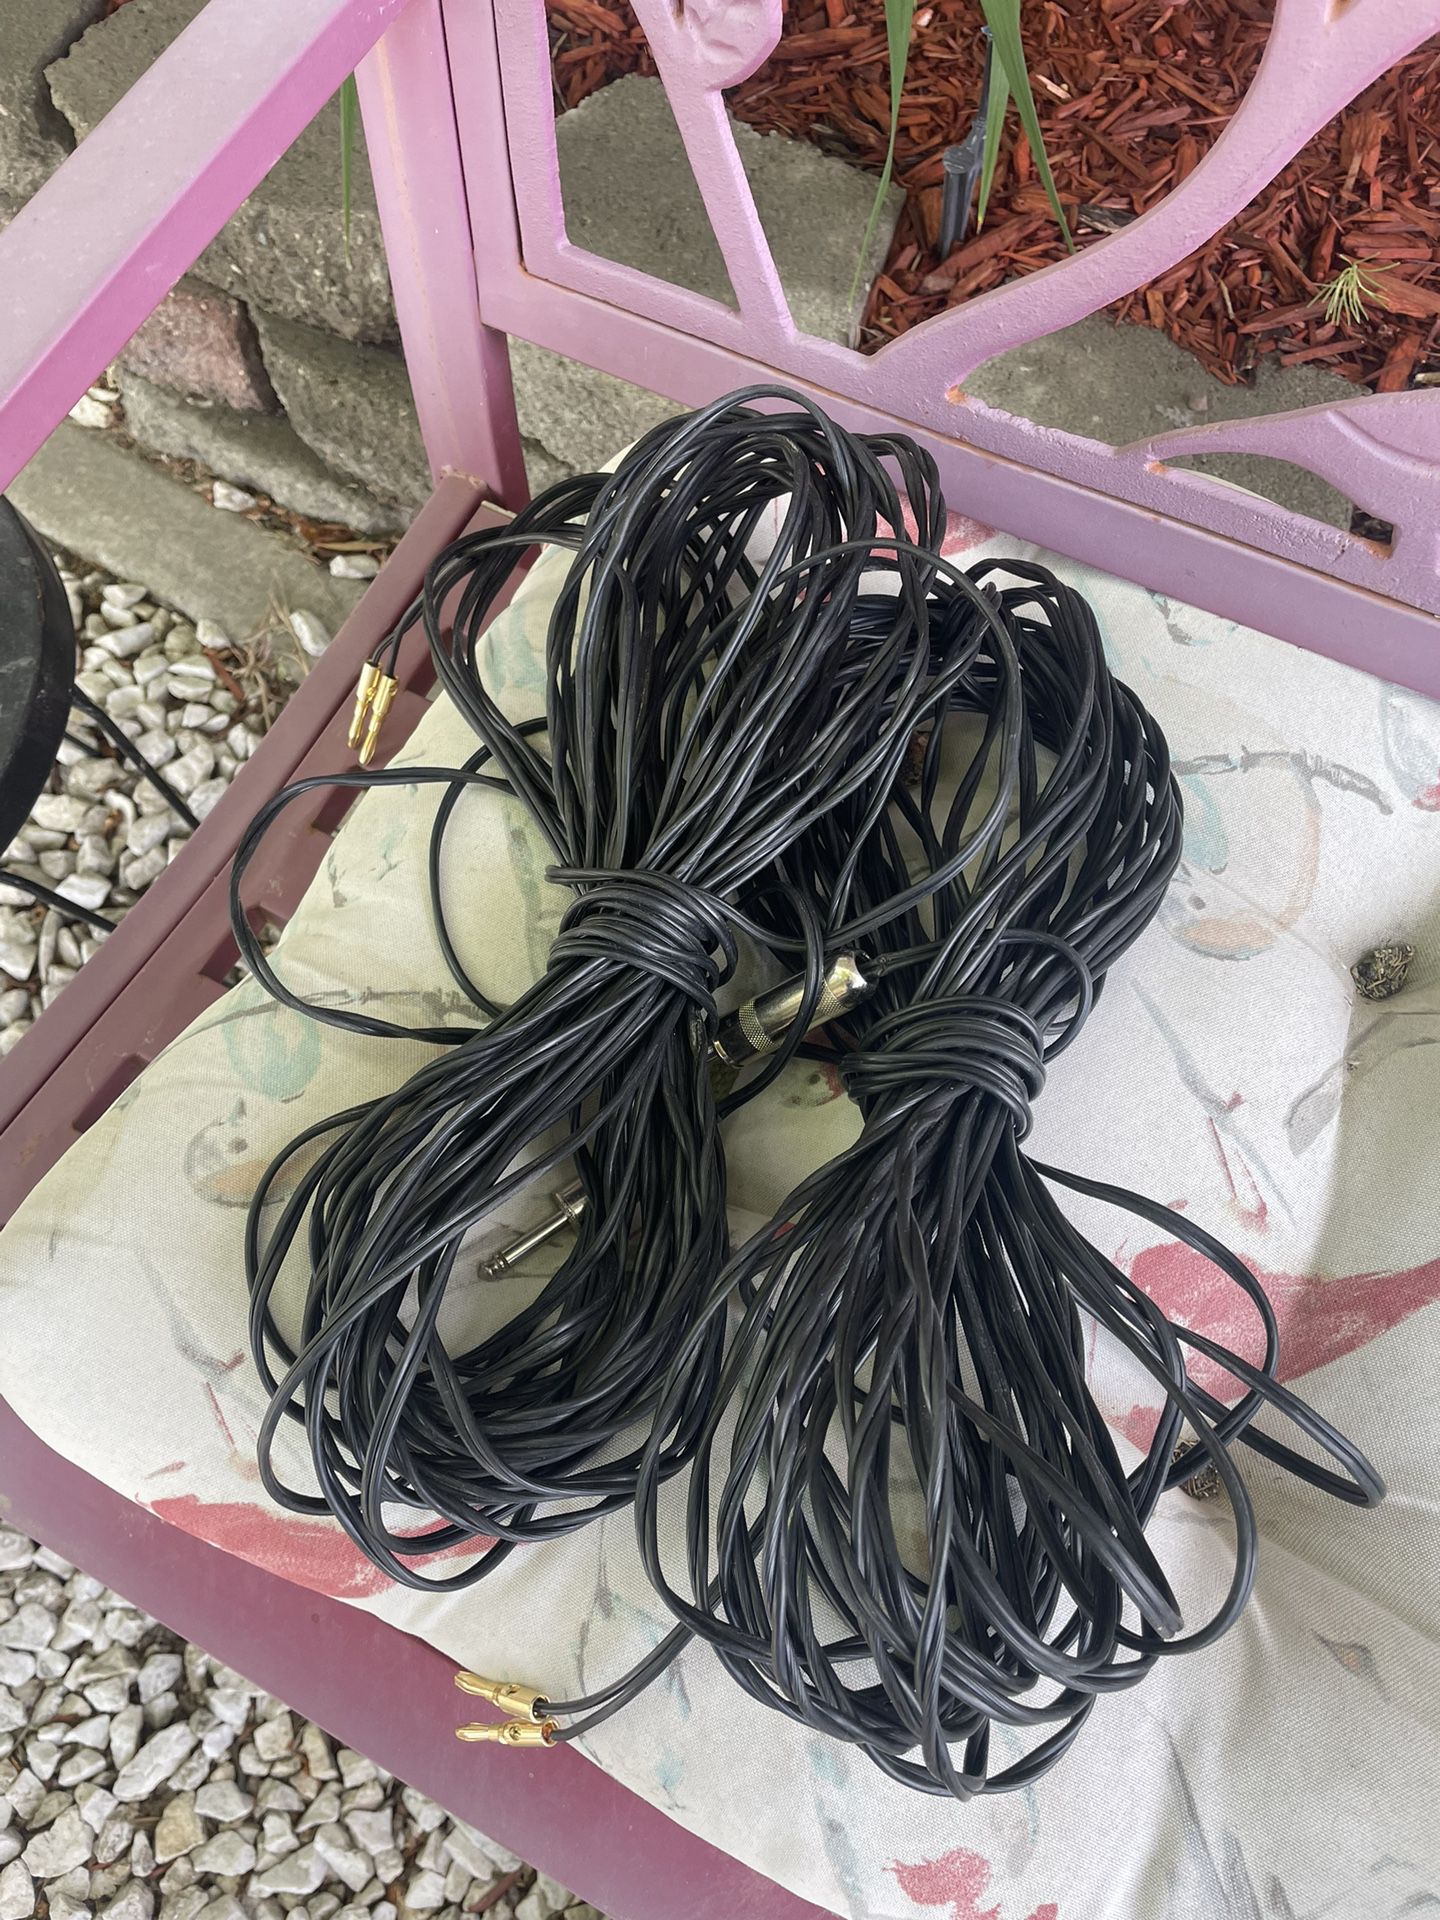 55 Feet Of Speaker Wire (2) 1/4 To Banana Clips 